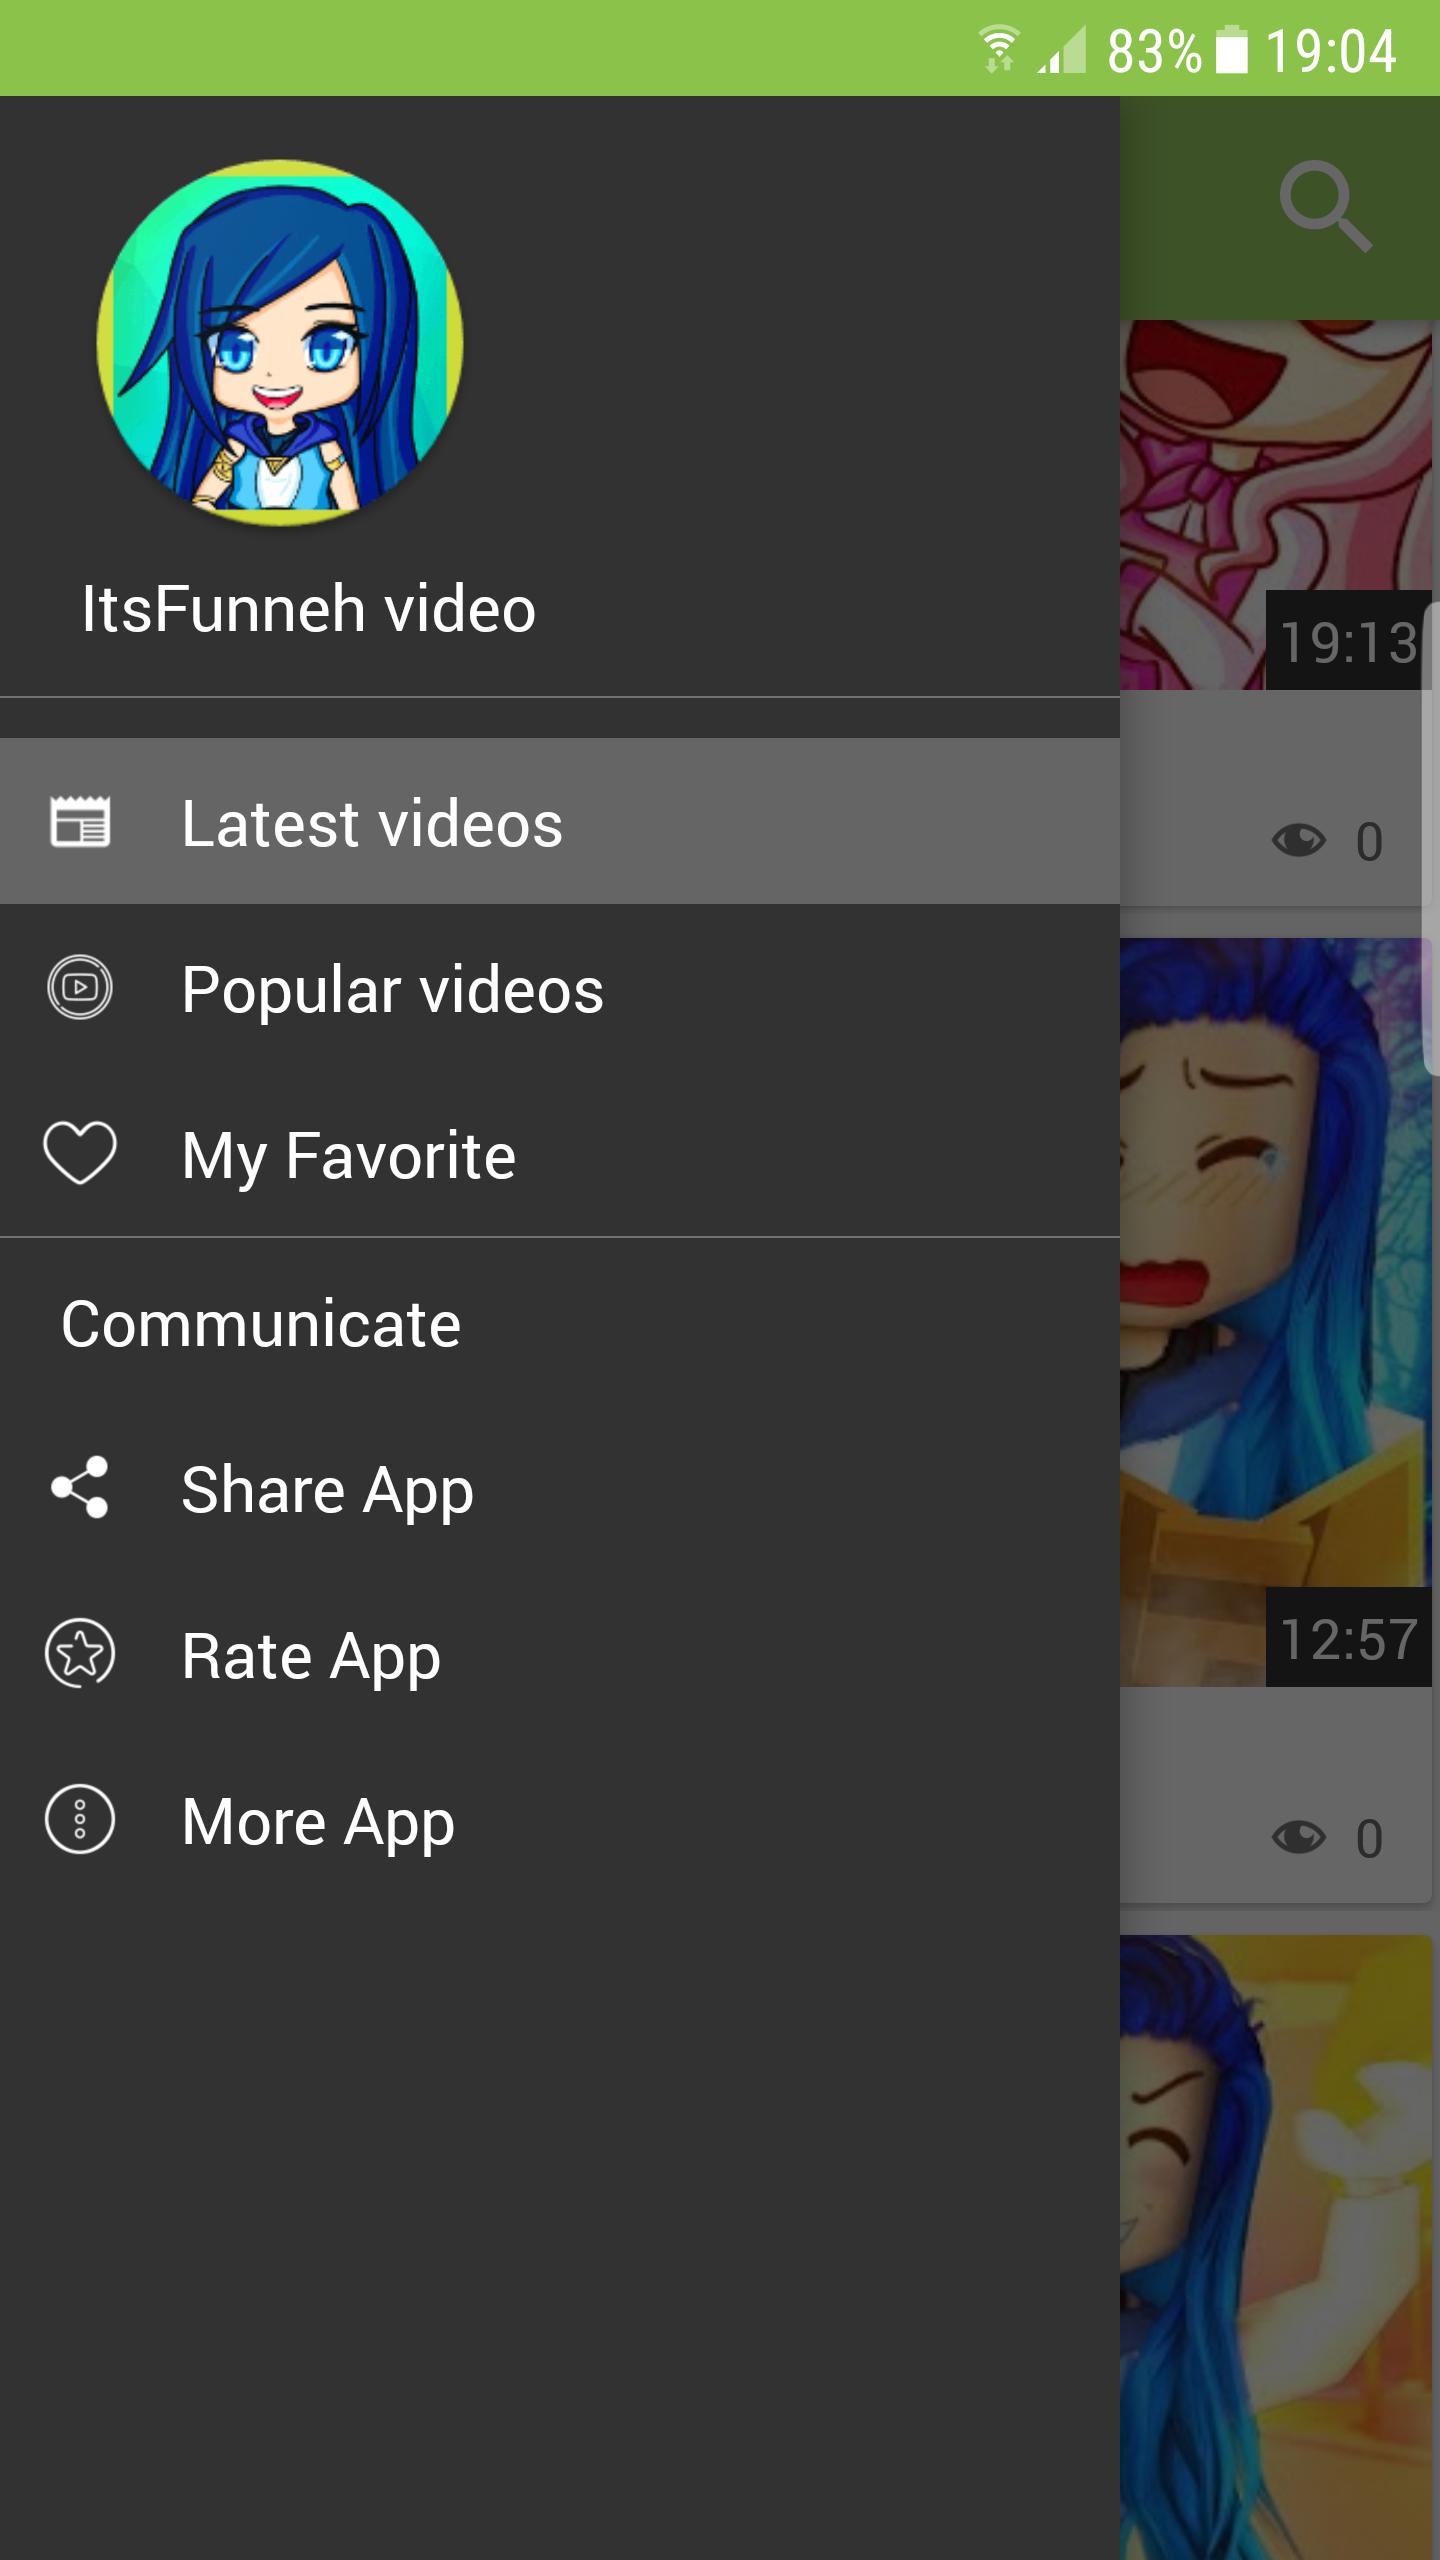 Itsfunneh Roblox Video For Android Apk Download - itsfunneh roblox video 102 apk androidappsapkco